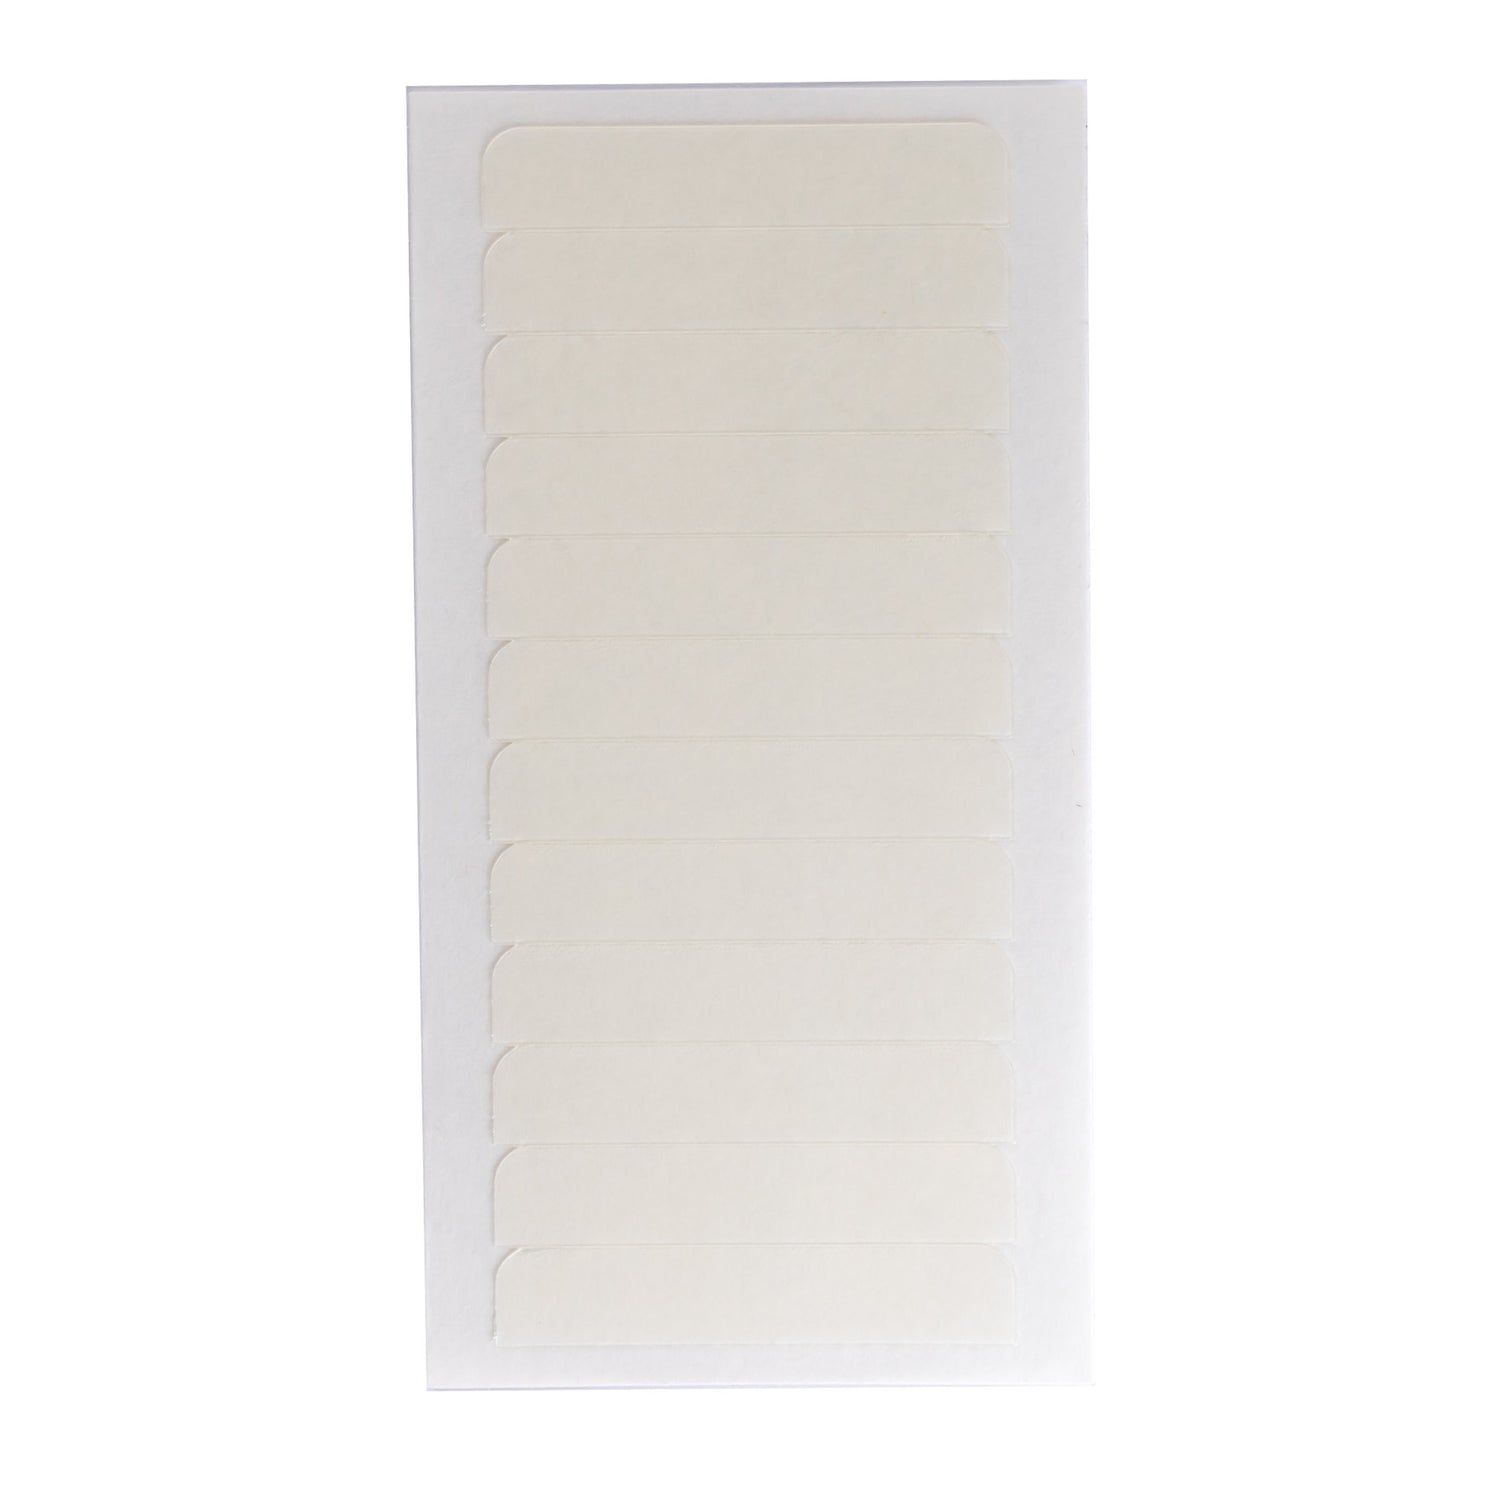 A sheet of Big Kizzy® Pro Hold Single Sided Hair Extension Replacement Tape Tabs